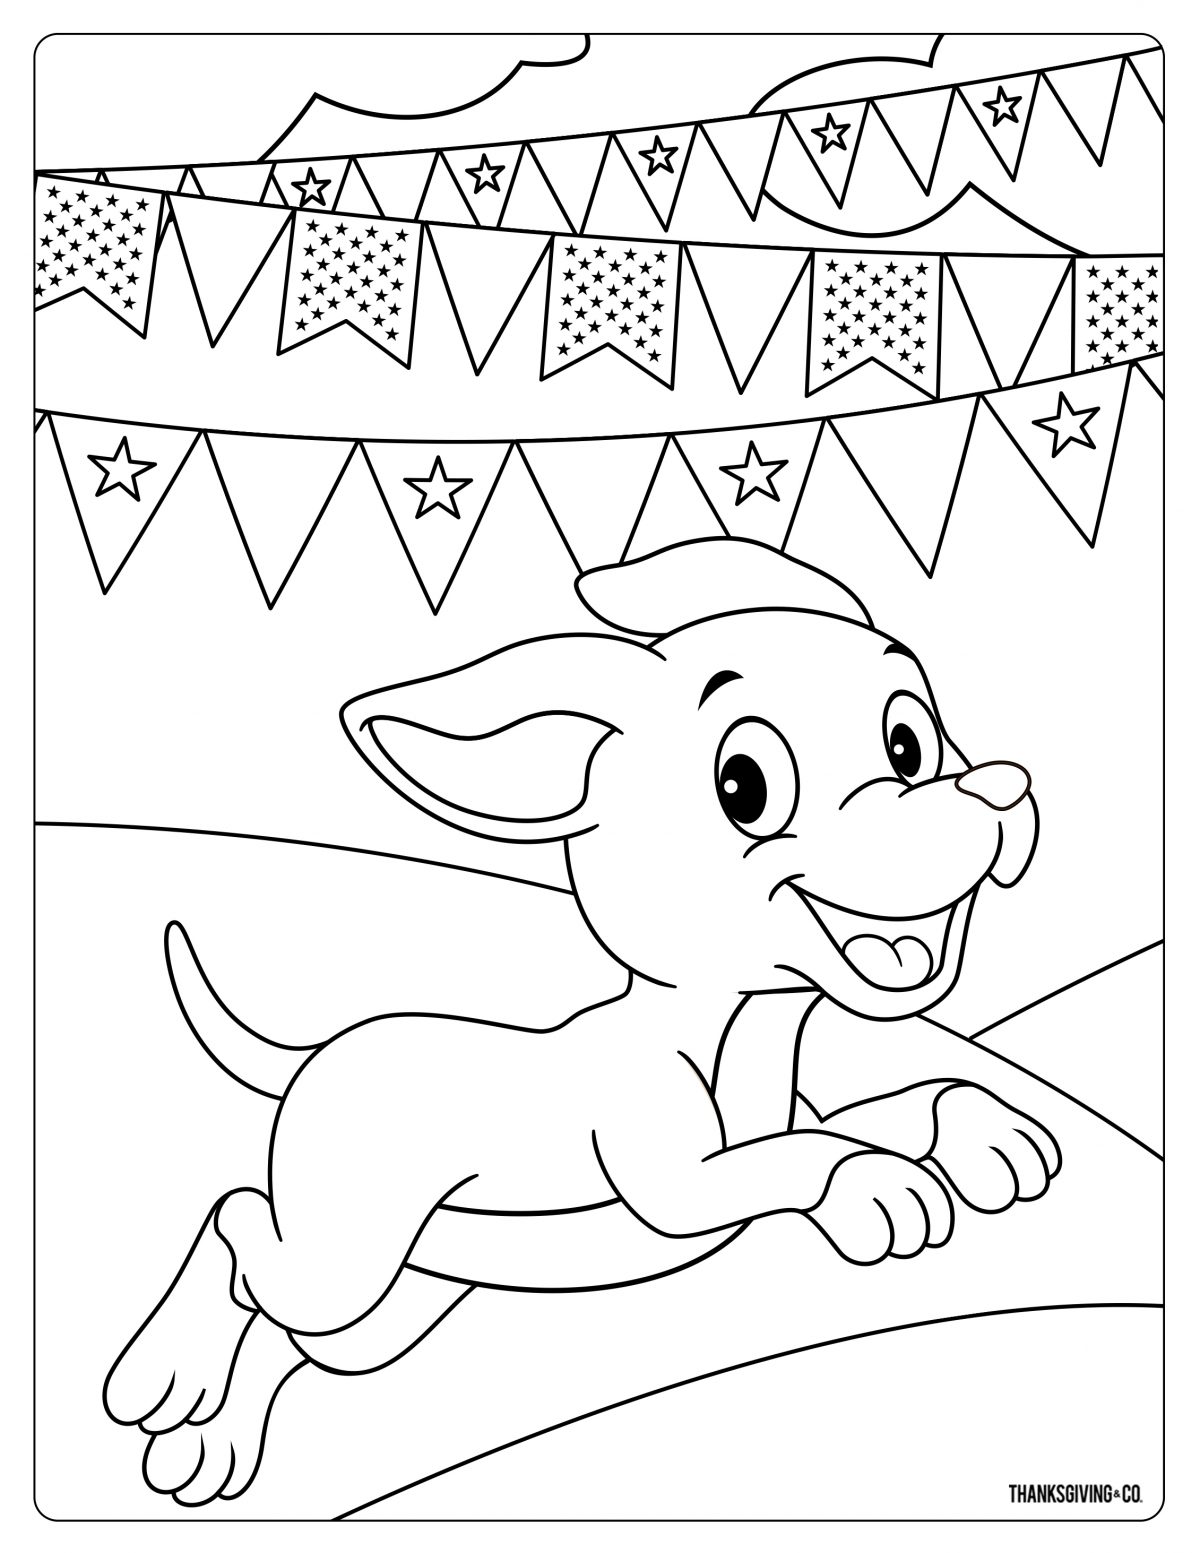 Independence Day coloring page: Puppy with flag banners